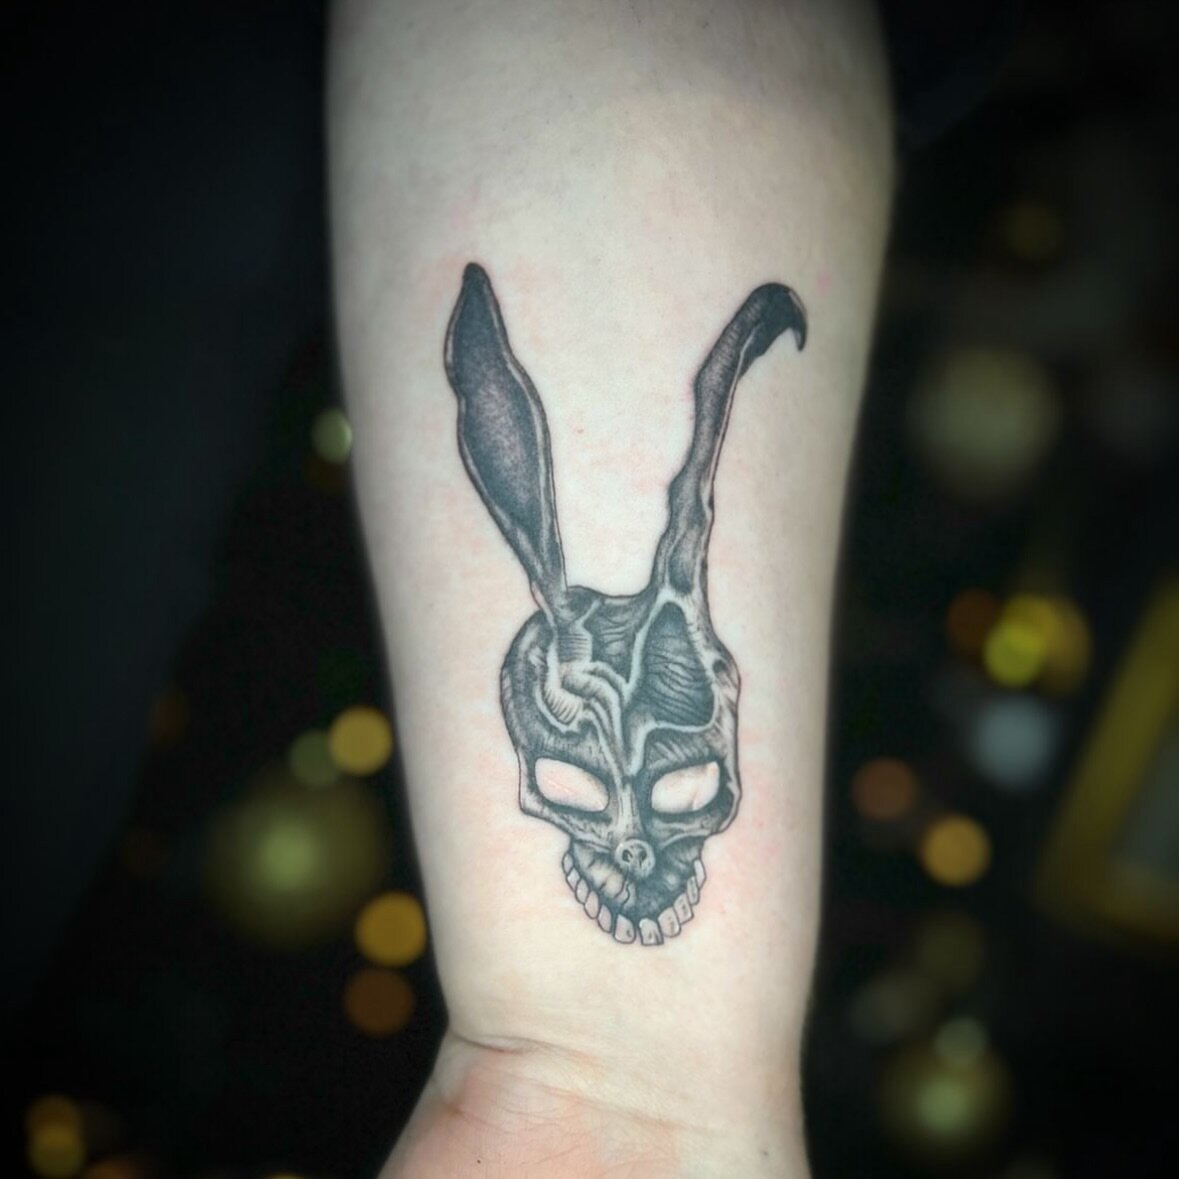 Awesome Donnie Darko piece by @gfoxtattoos 
.
.
.
.
.
.
,
,
.
Newcastle under Lyme appointment only tattoo studio, DM or fill out the enquiry form in my bio for enquiries.
.
#tattoo #blackworkers #dotwork #donniedarko #donniedarkotattoo #franktattoo 